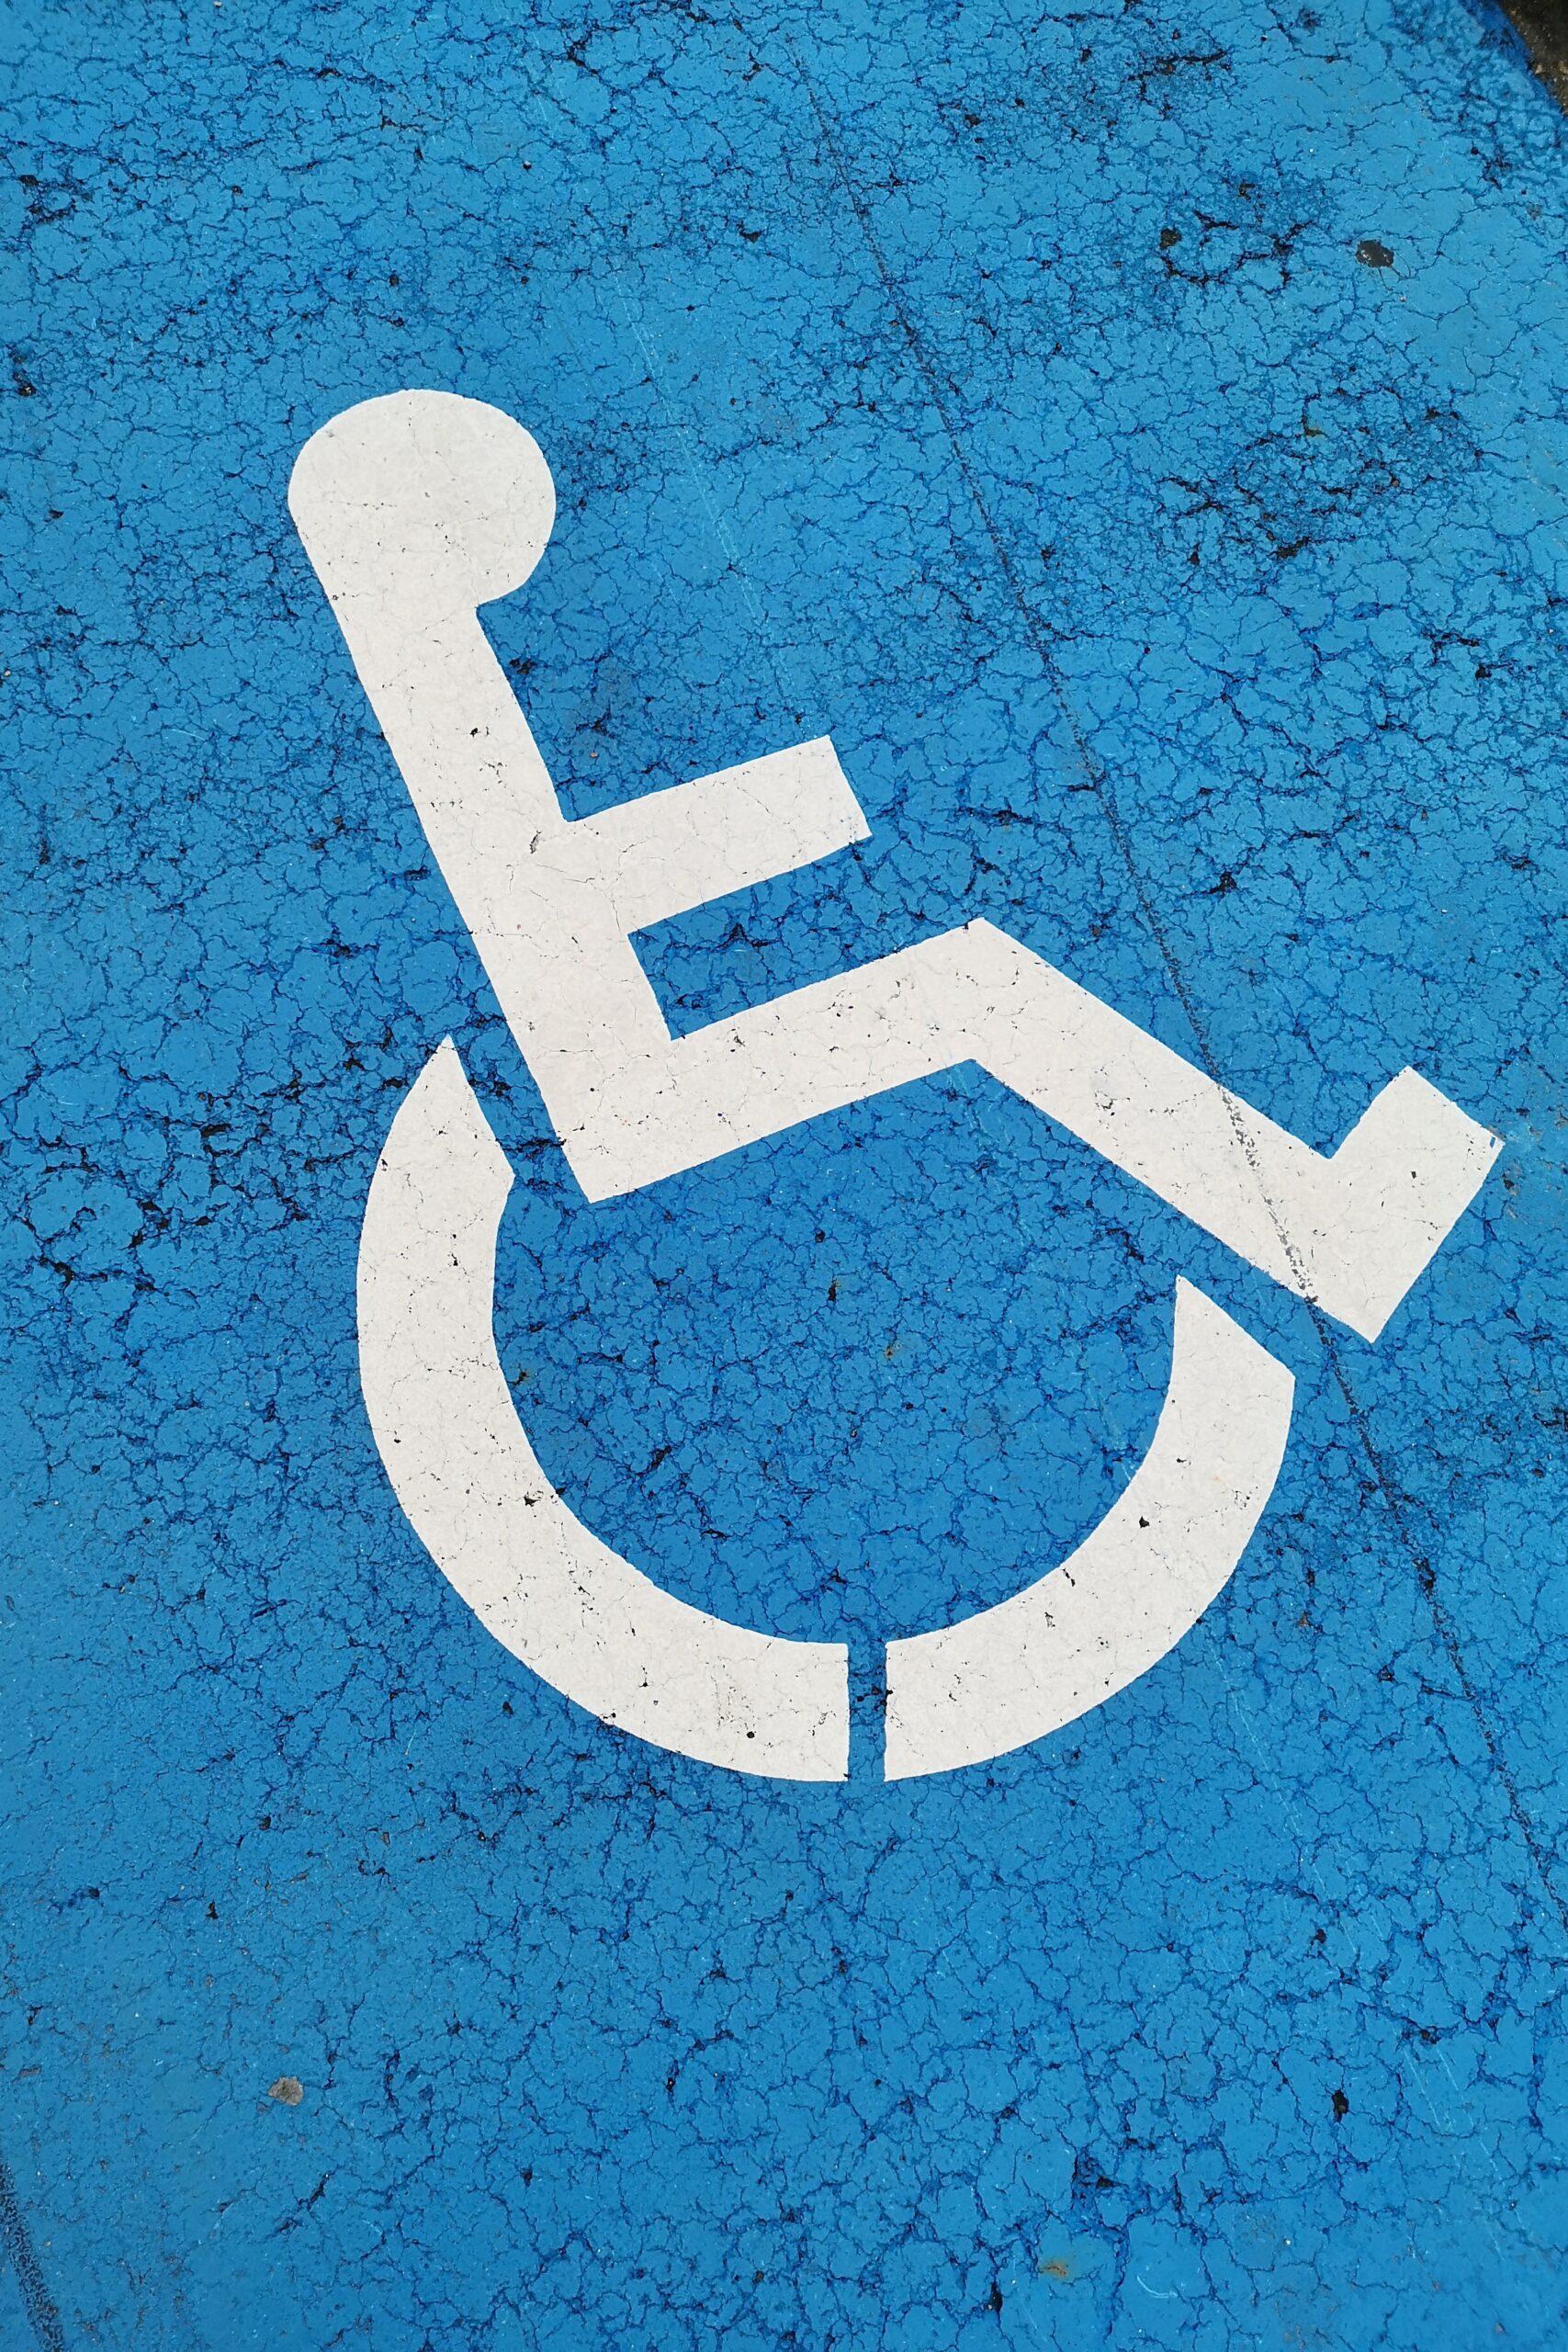 disability sign on a blue background